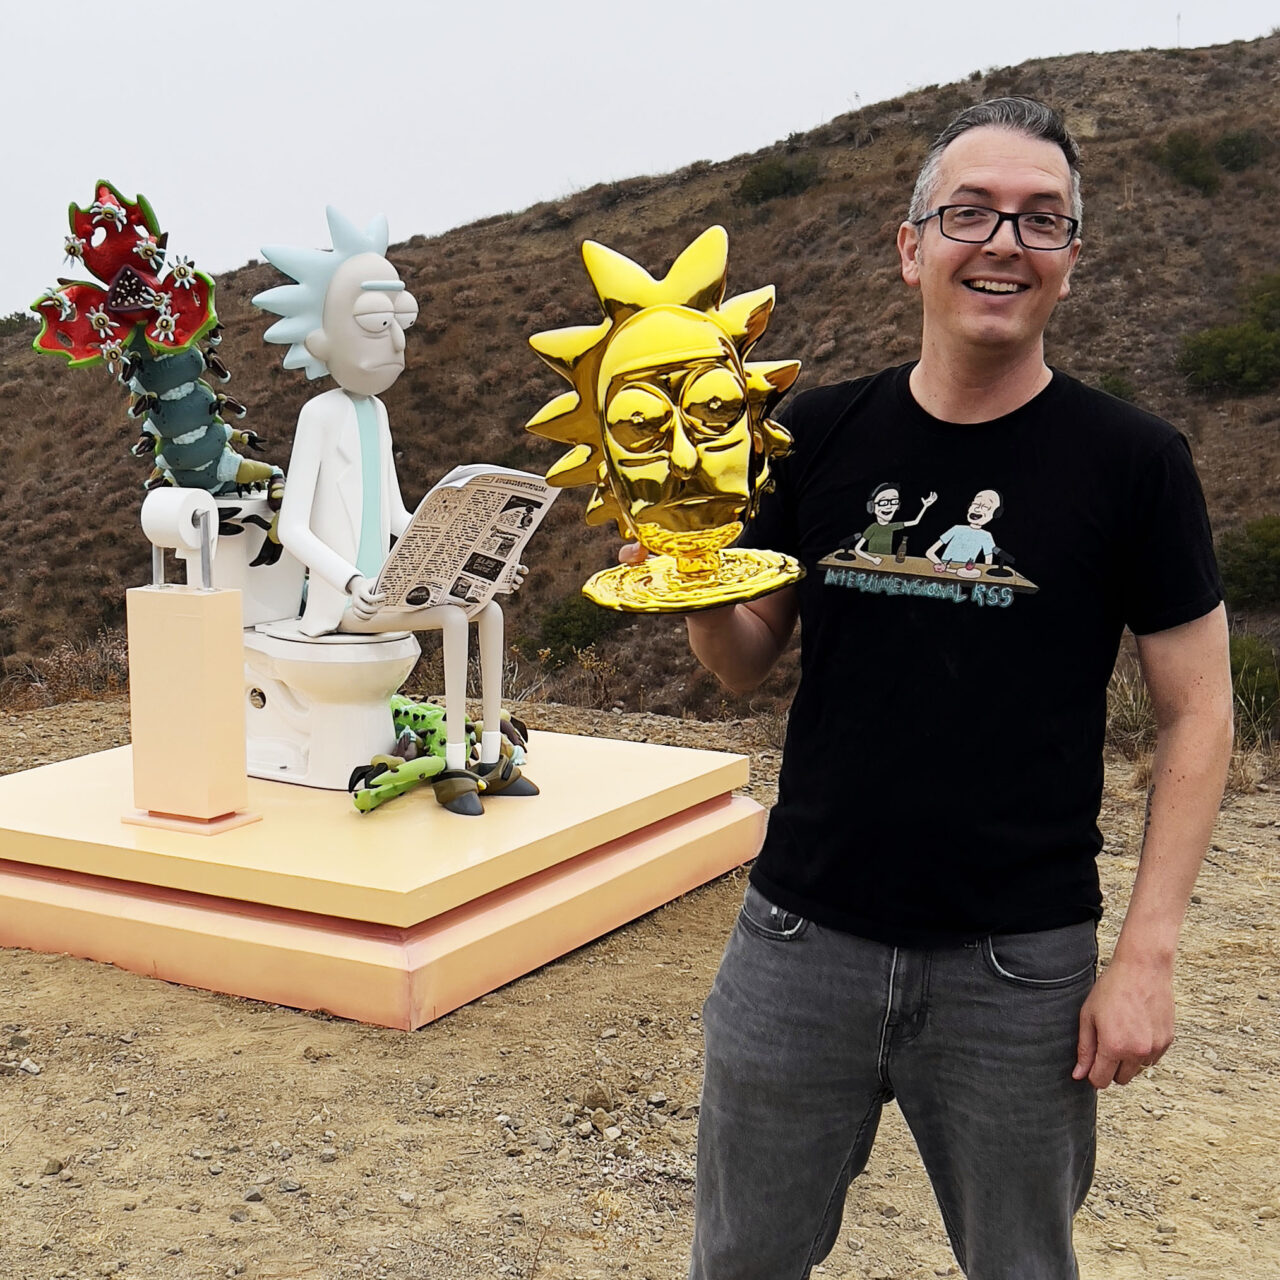 A sculpture of Rick and Morty character Rick Sanchez in Malibu, CA. The scene is part of the ongoing #WORMAGEDDON fan experience leading to the global release of Adult Swim’s Rick and Morty season six starting September 4, 2022. (Courtesy Adult Swim)